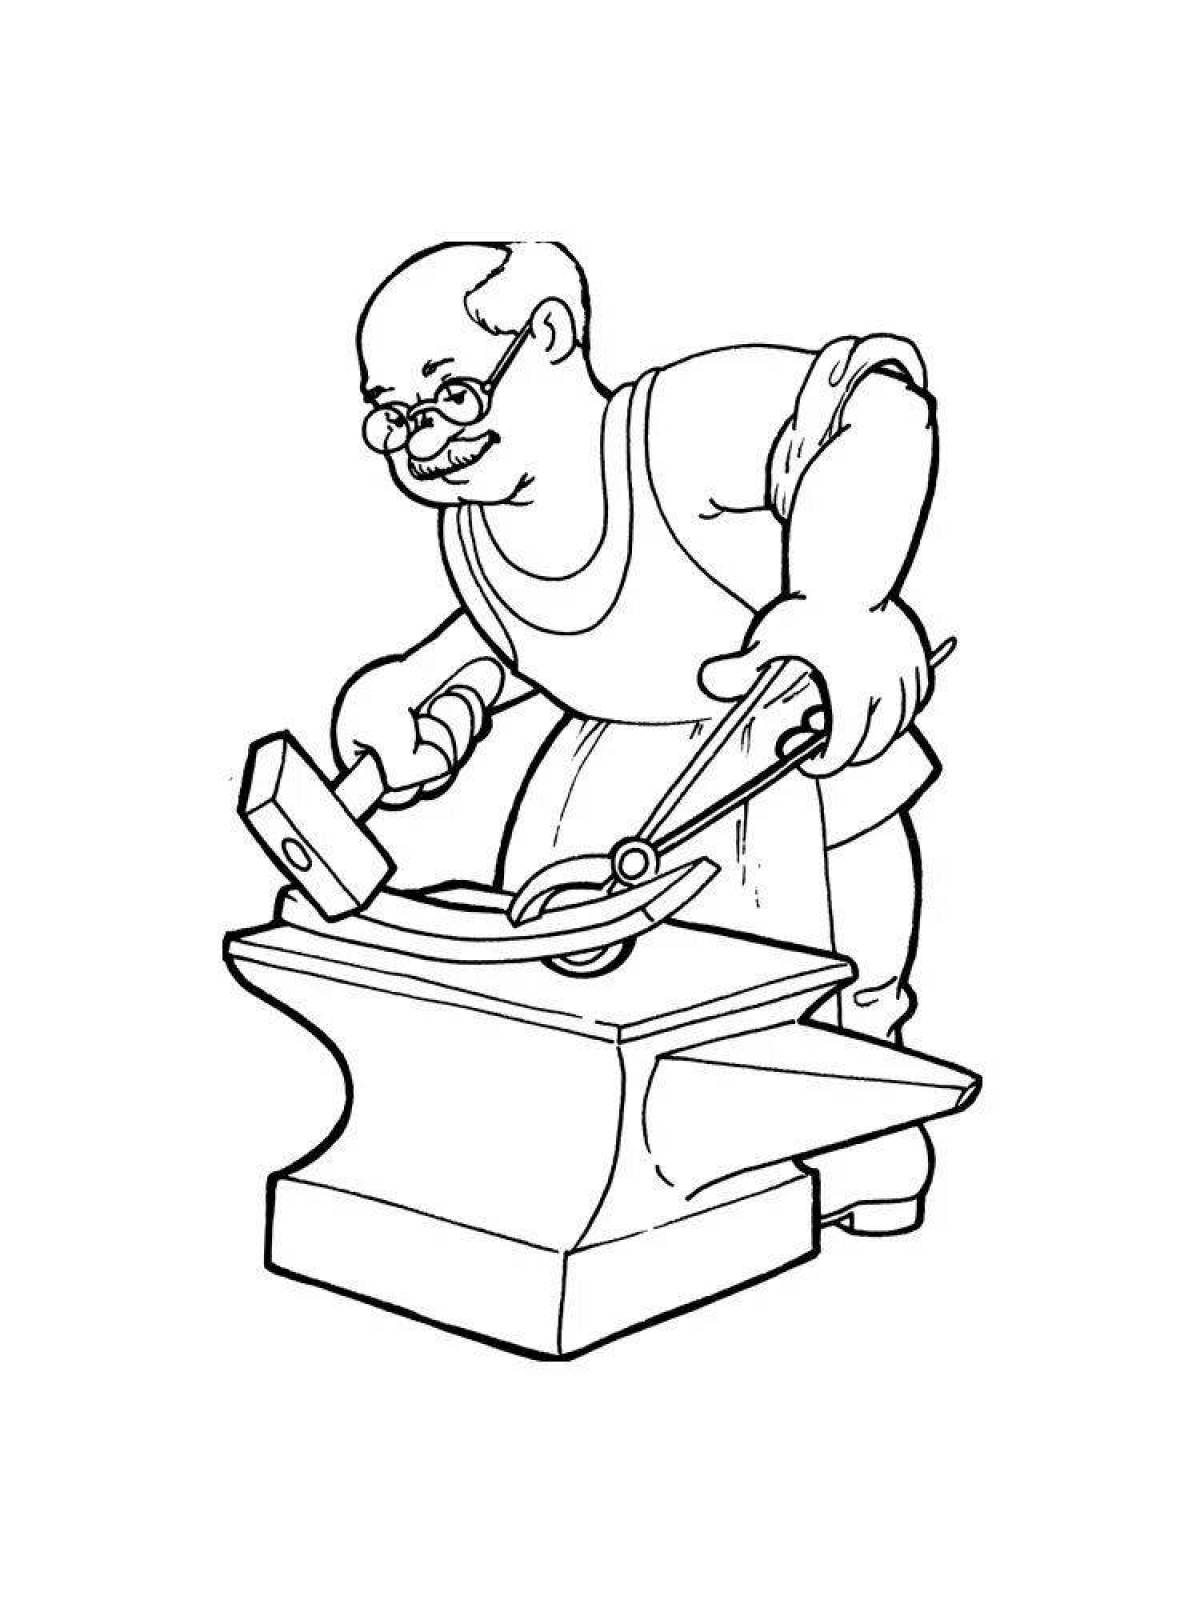 Great blacksmith coloring page